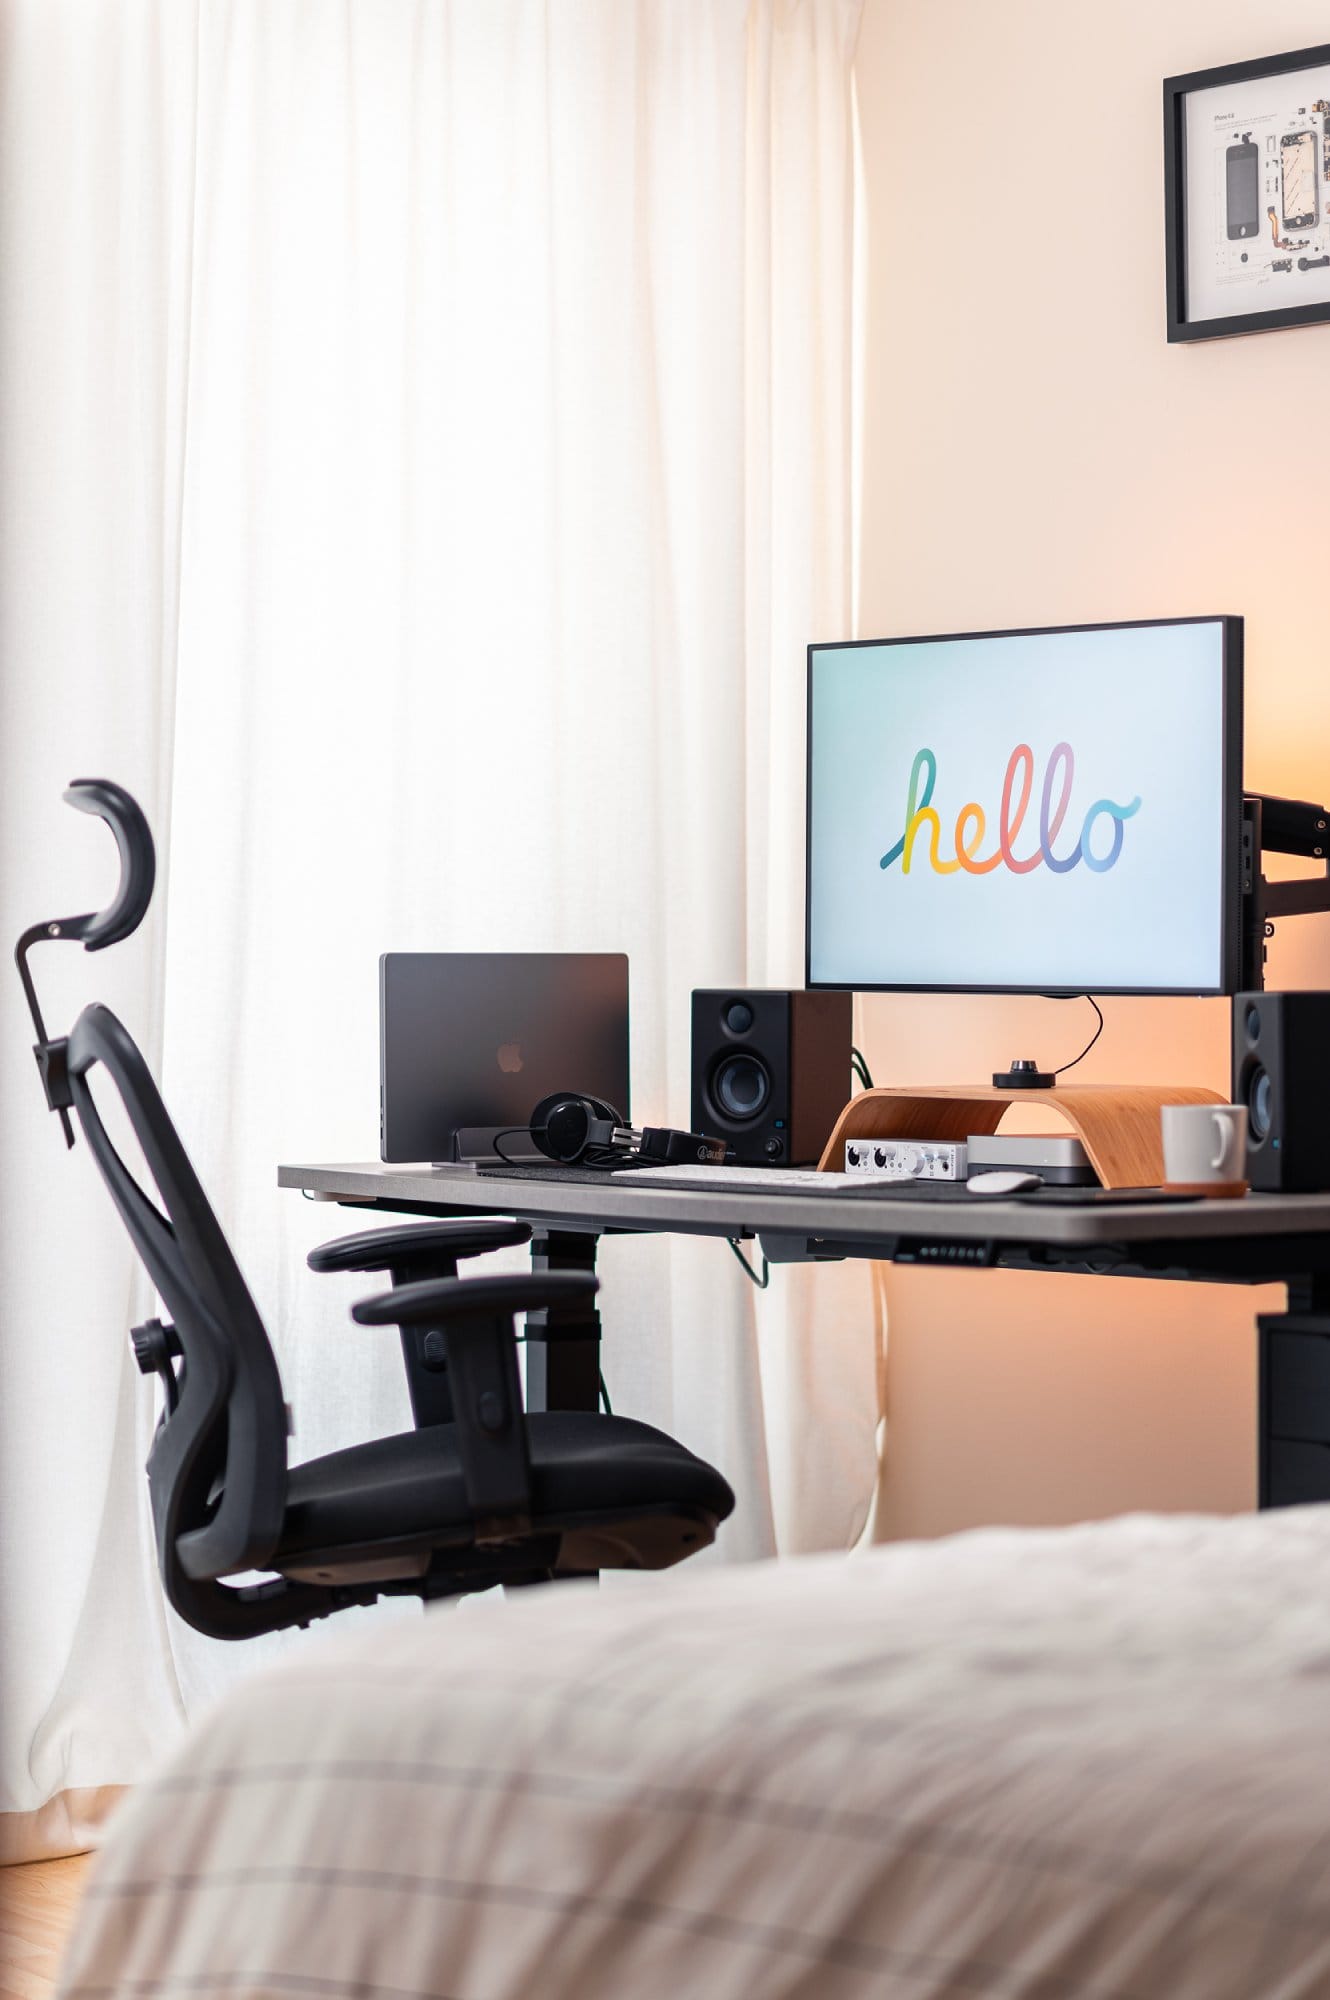 An inviting bedroom home office setup with a desk chair turned towards a desk